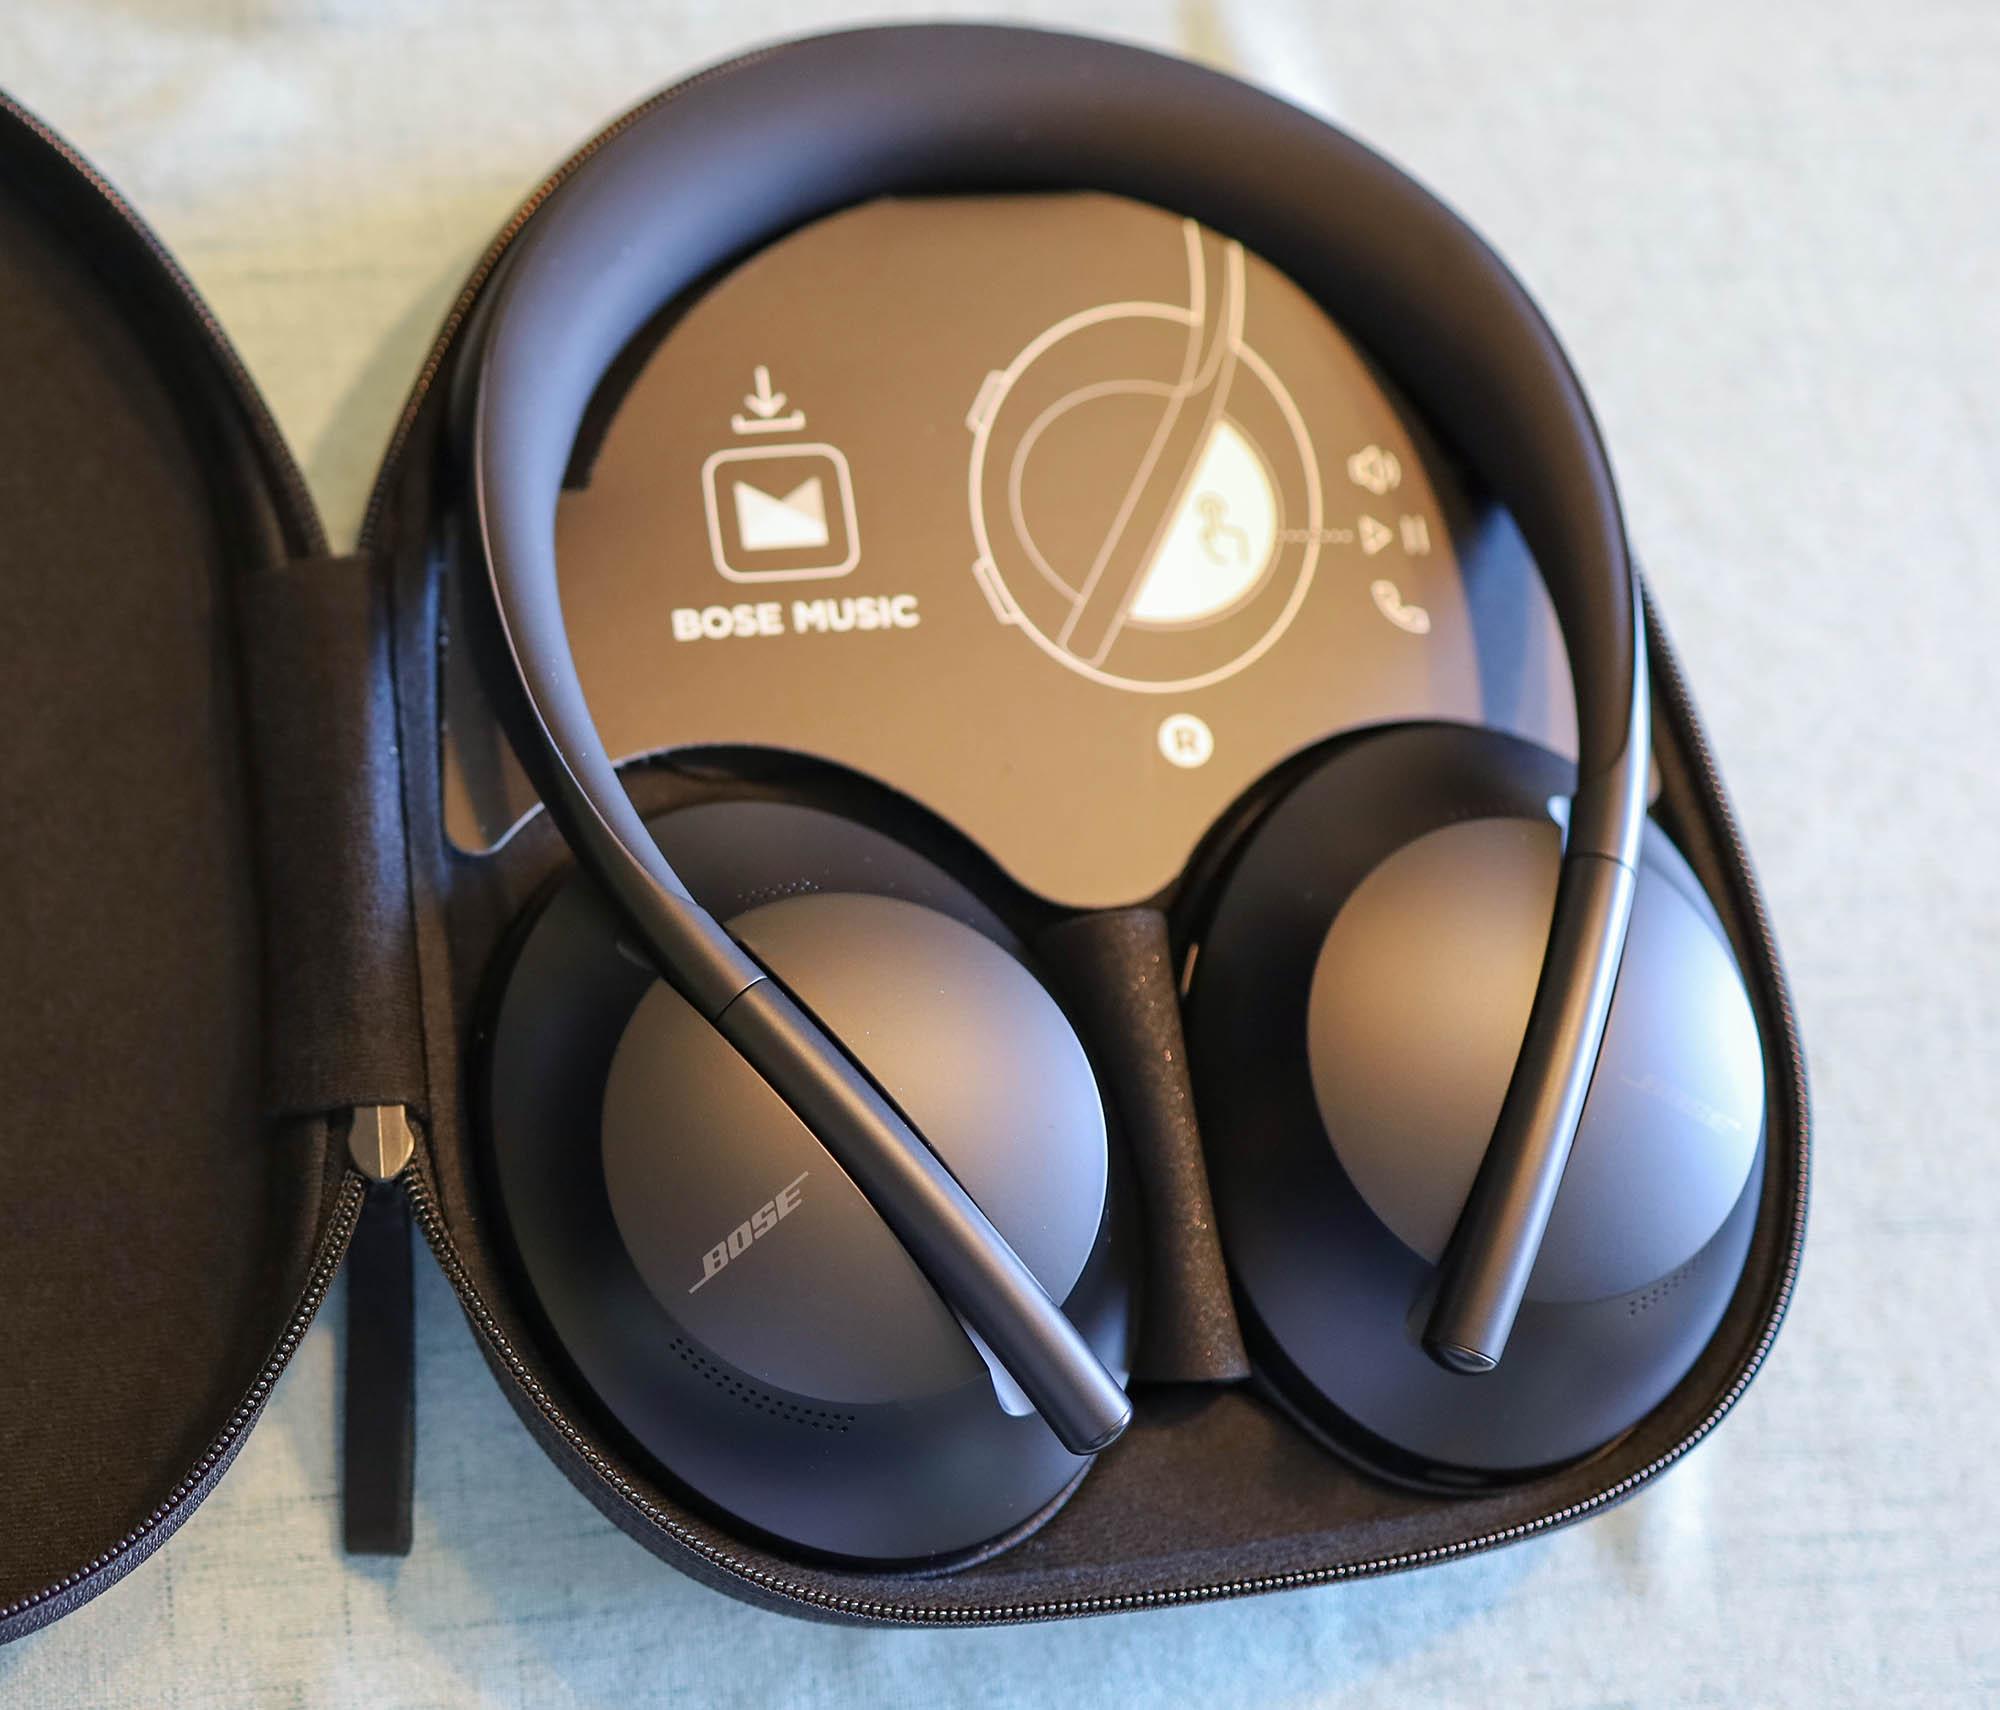 Hands-on with five great options in this popular category 62cf4fe9 bose 700